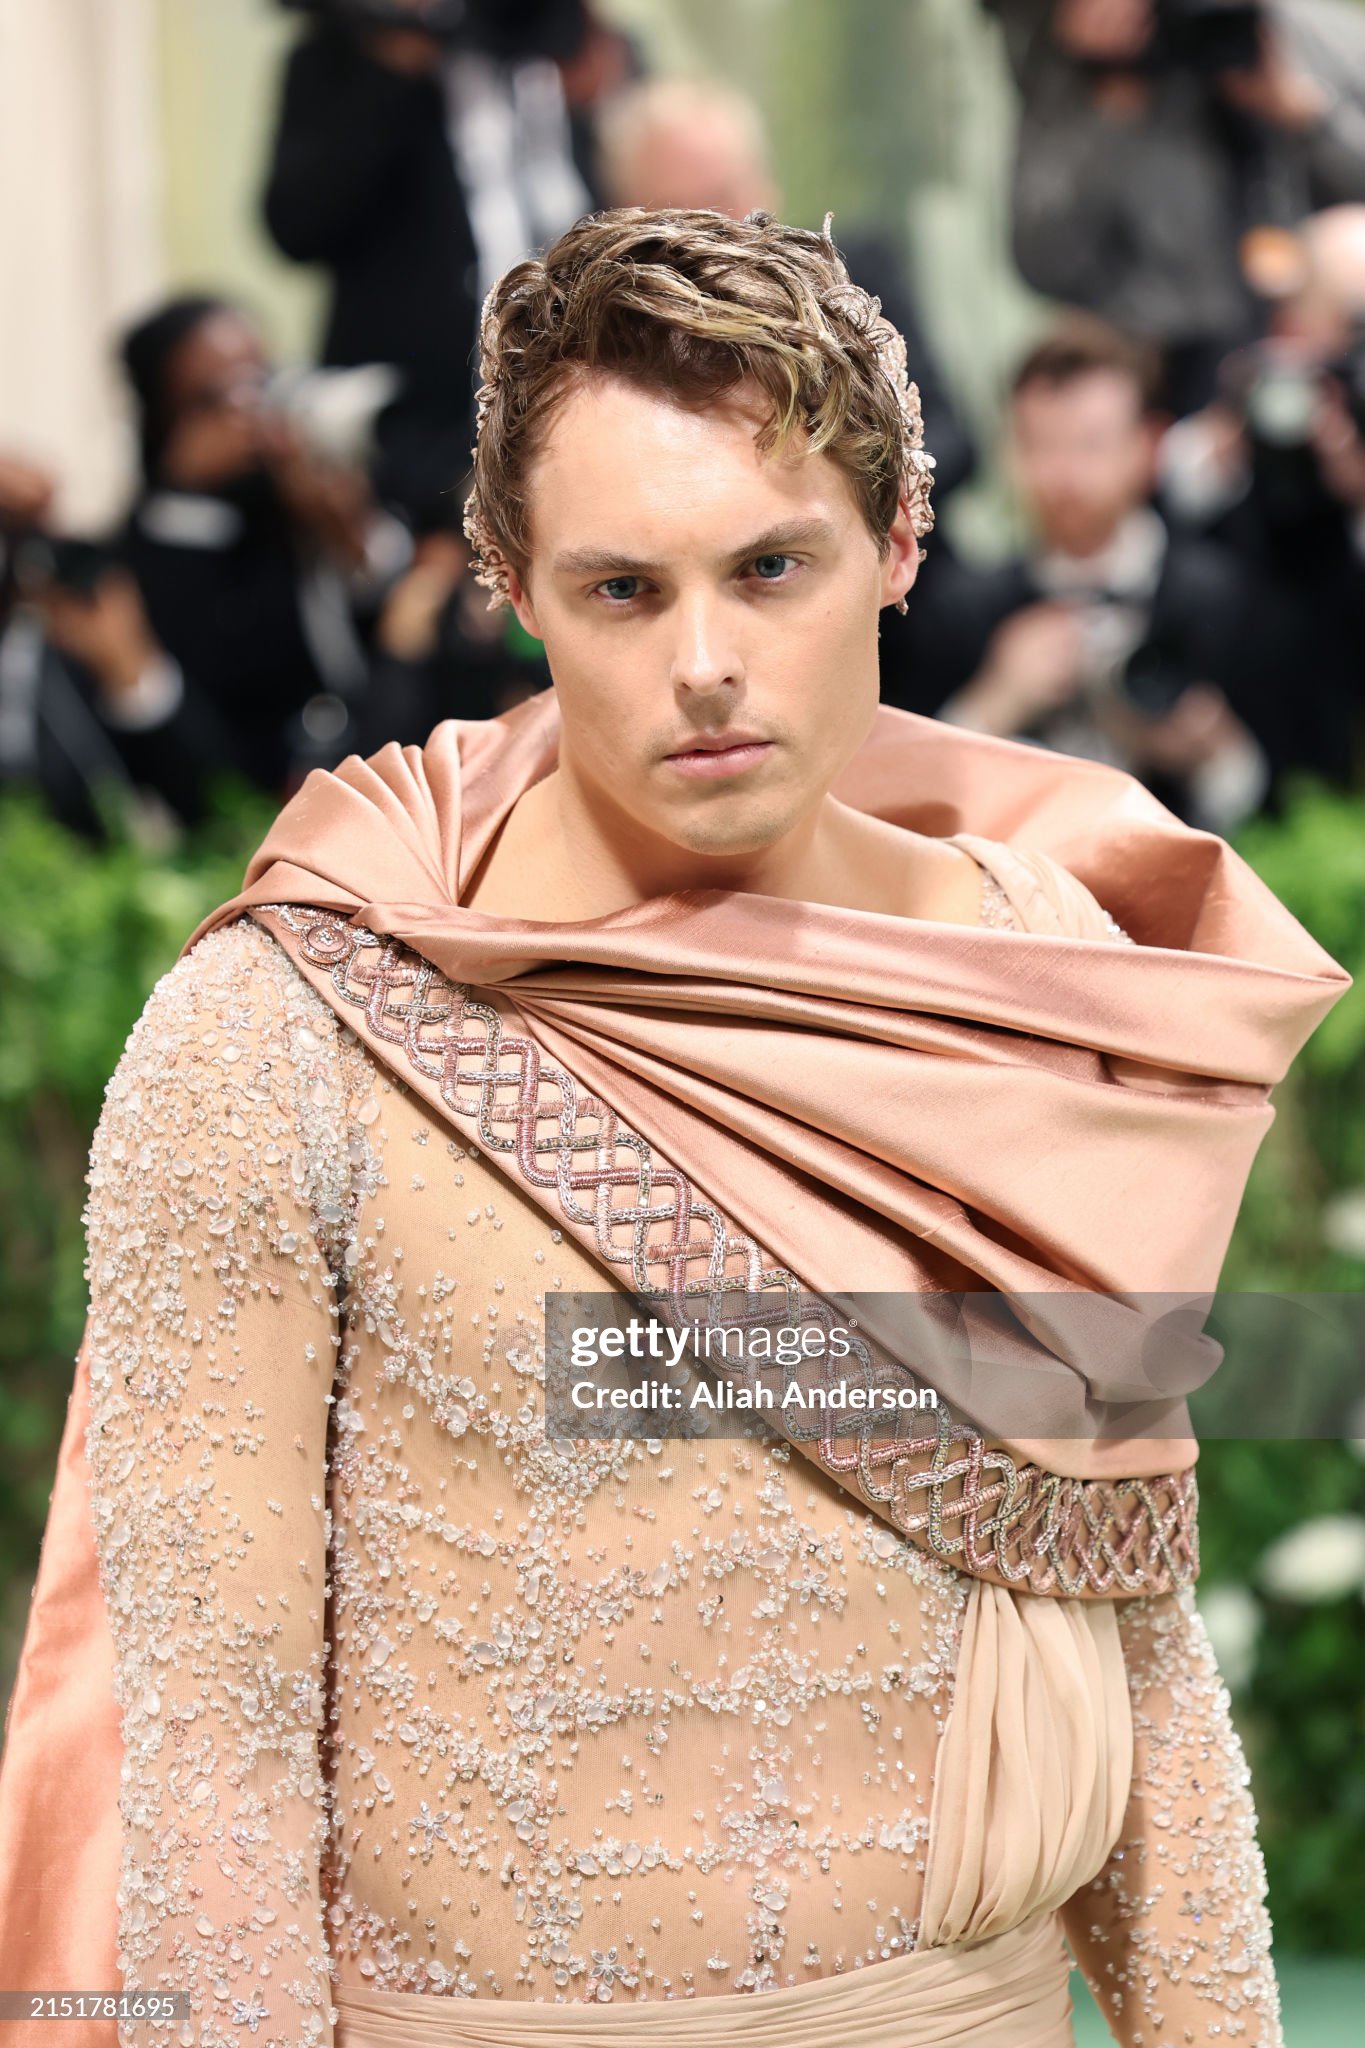 gettyimages-2151781695-2048x2048.jpg